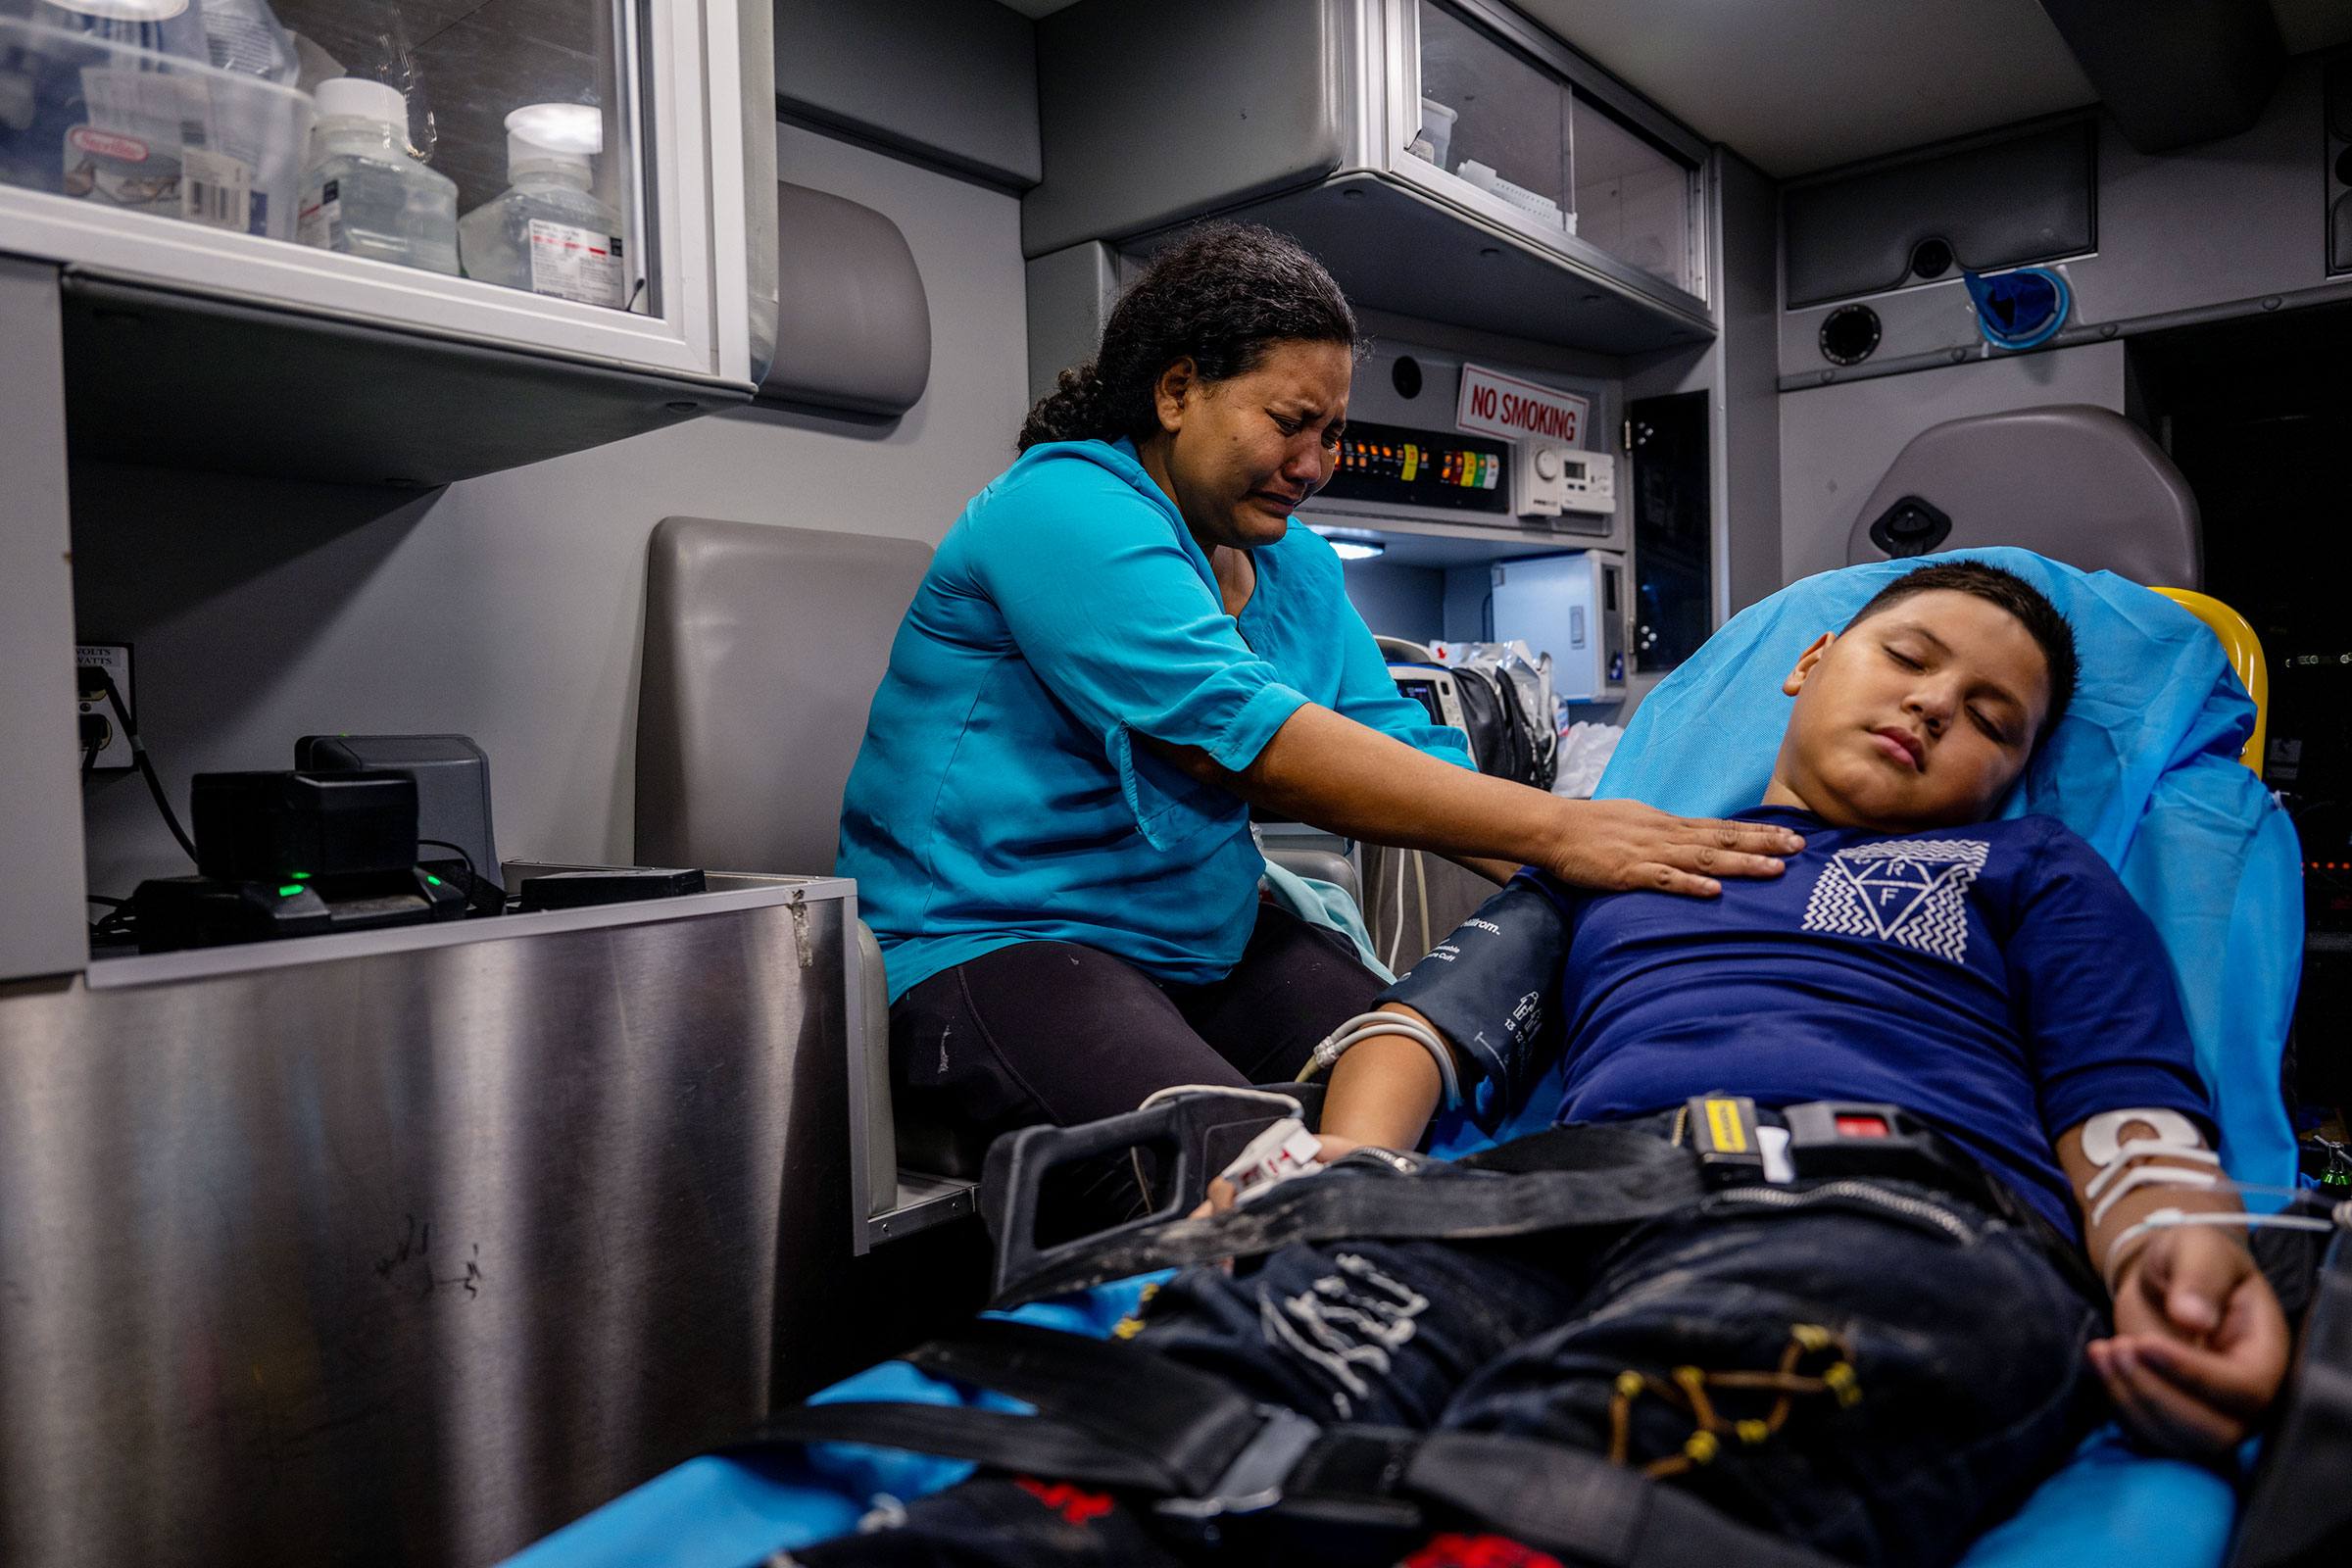 A mother cries beside her unconscious child in the back of an ambulance